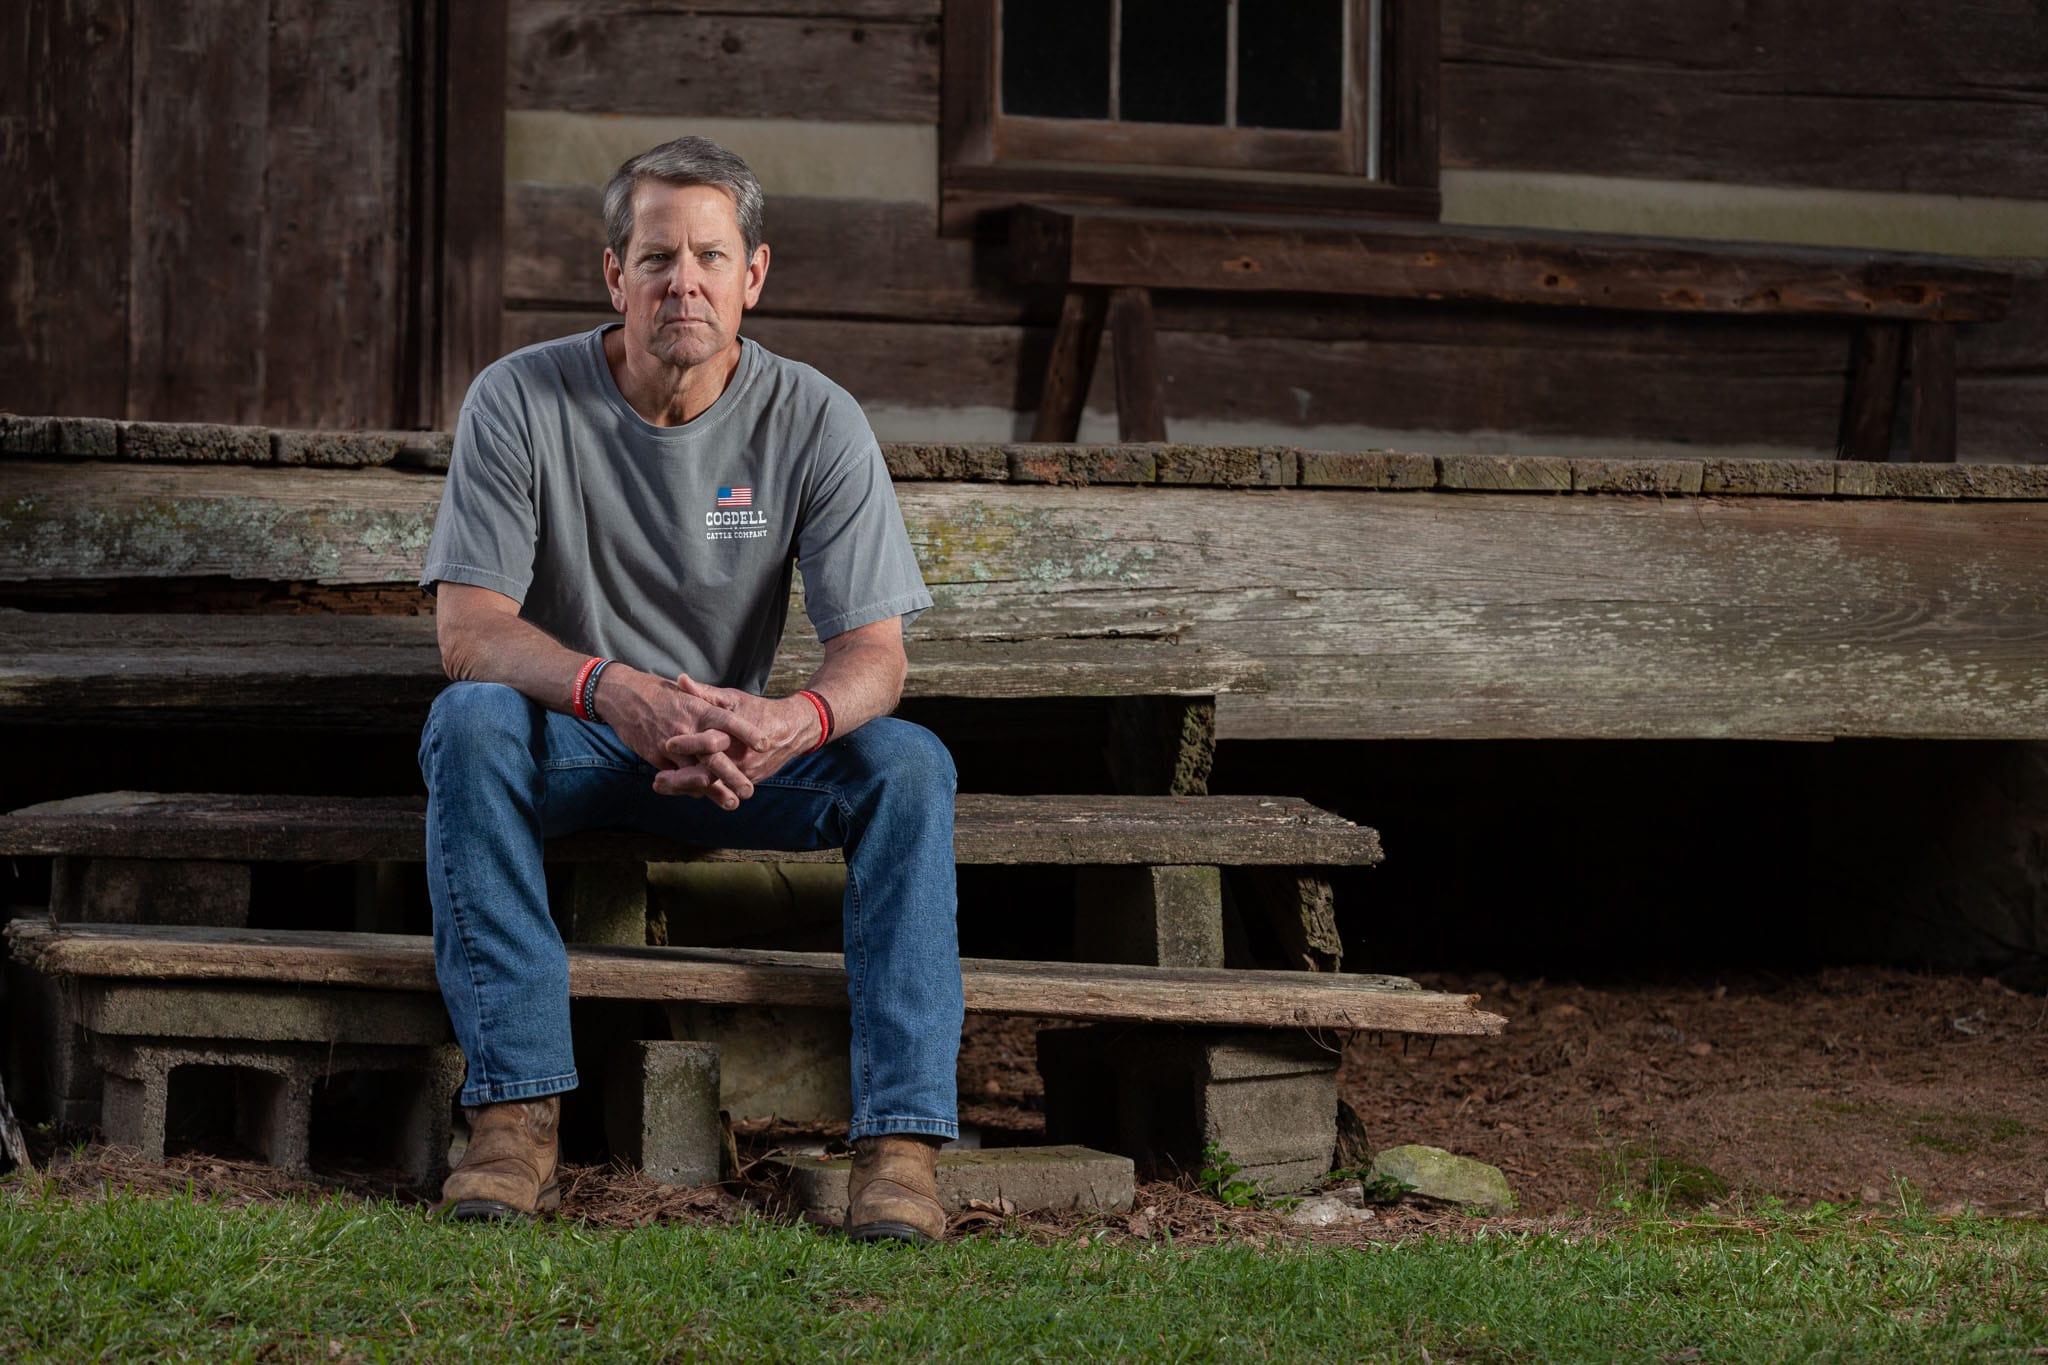 Georgia Governor Brian Kemp sitting on the steps of his family's historical cabin in Athens, Georgia.